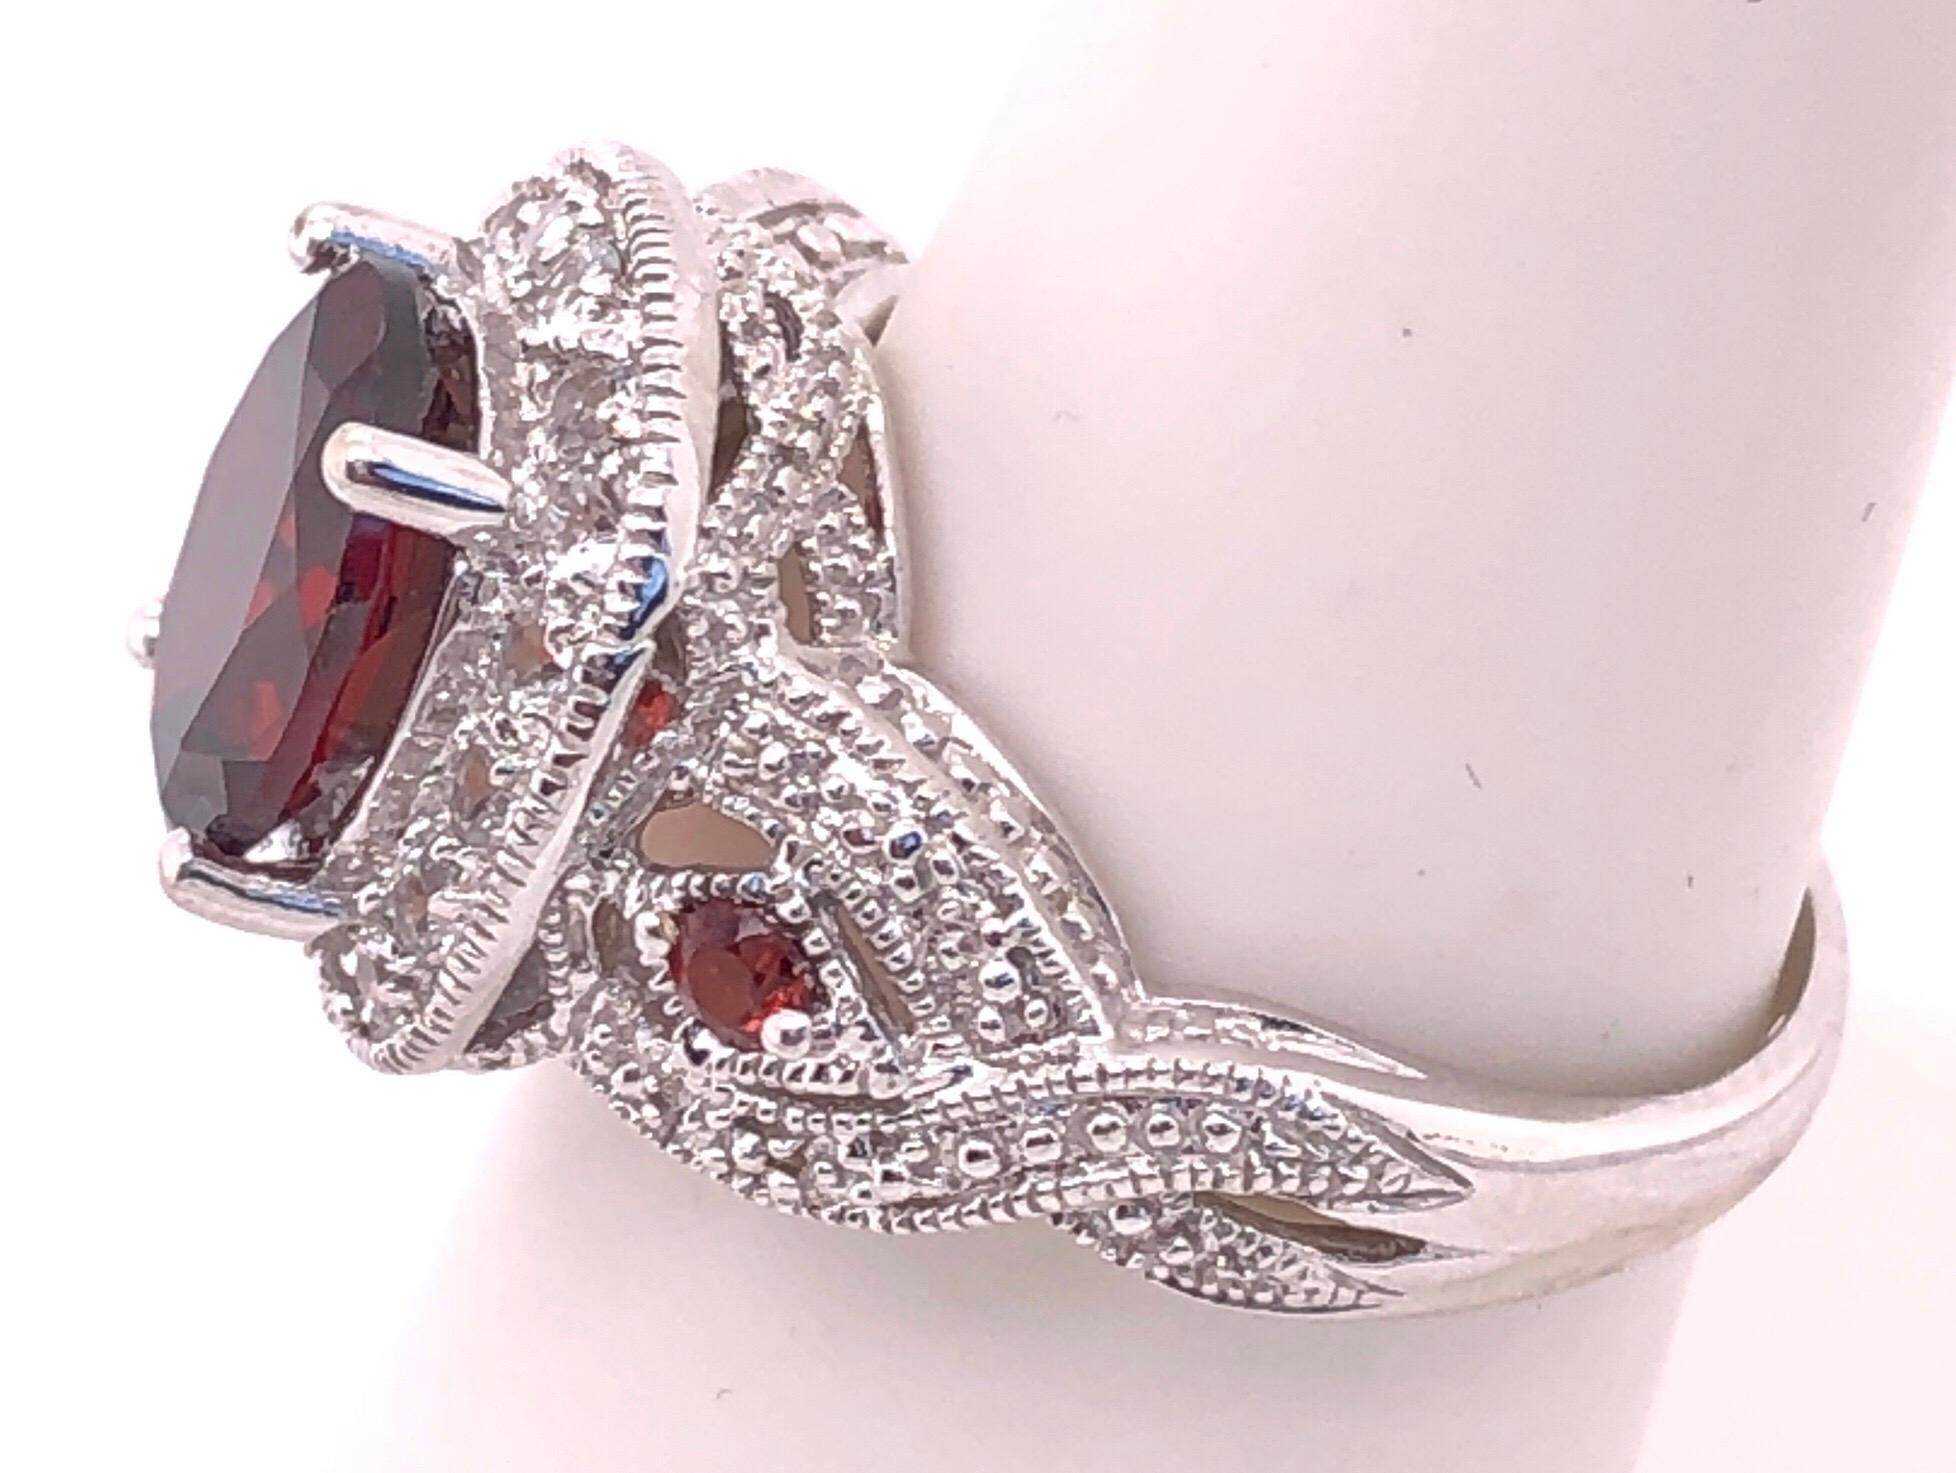 14 Karat White Gold Antique Ring Oval Garnet Center With  Accents Size 7. The garnet may be synthetic. 
16 piece round cubic zirconia
5 grams total weight.